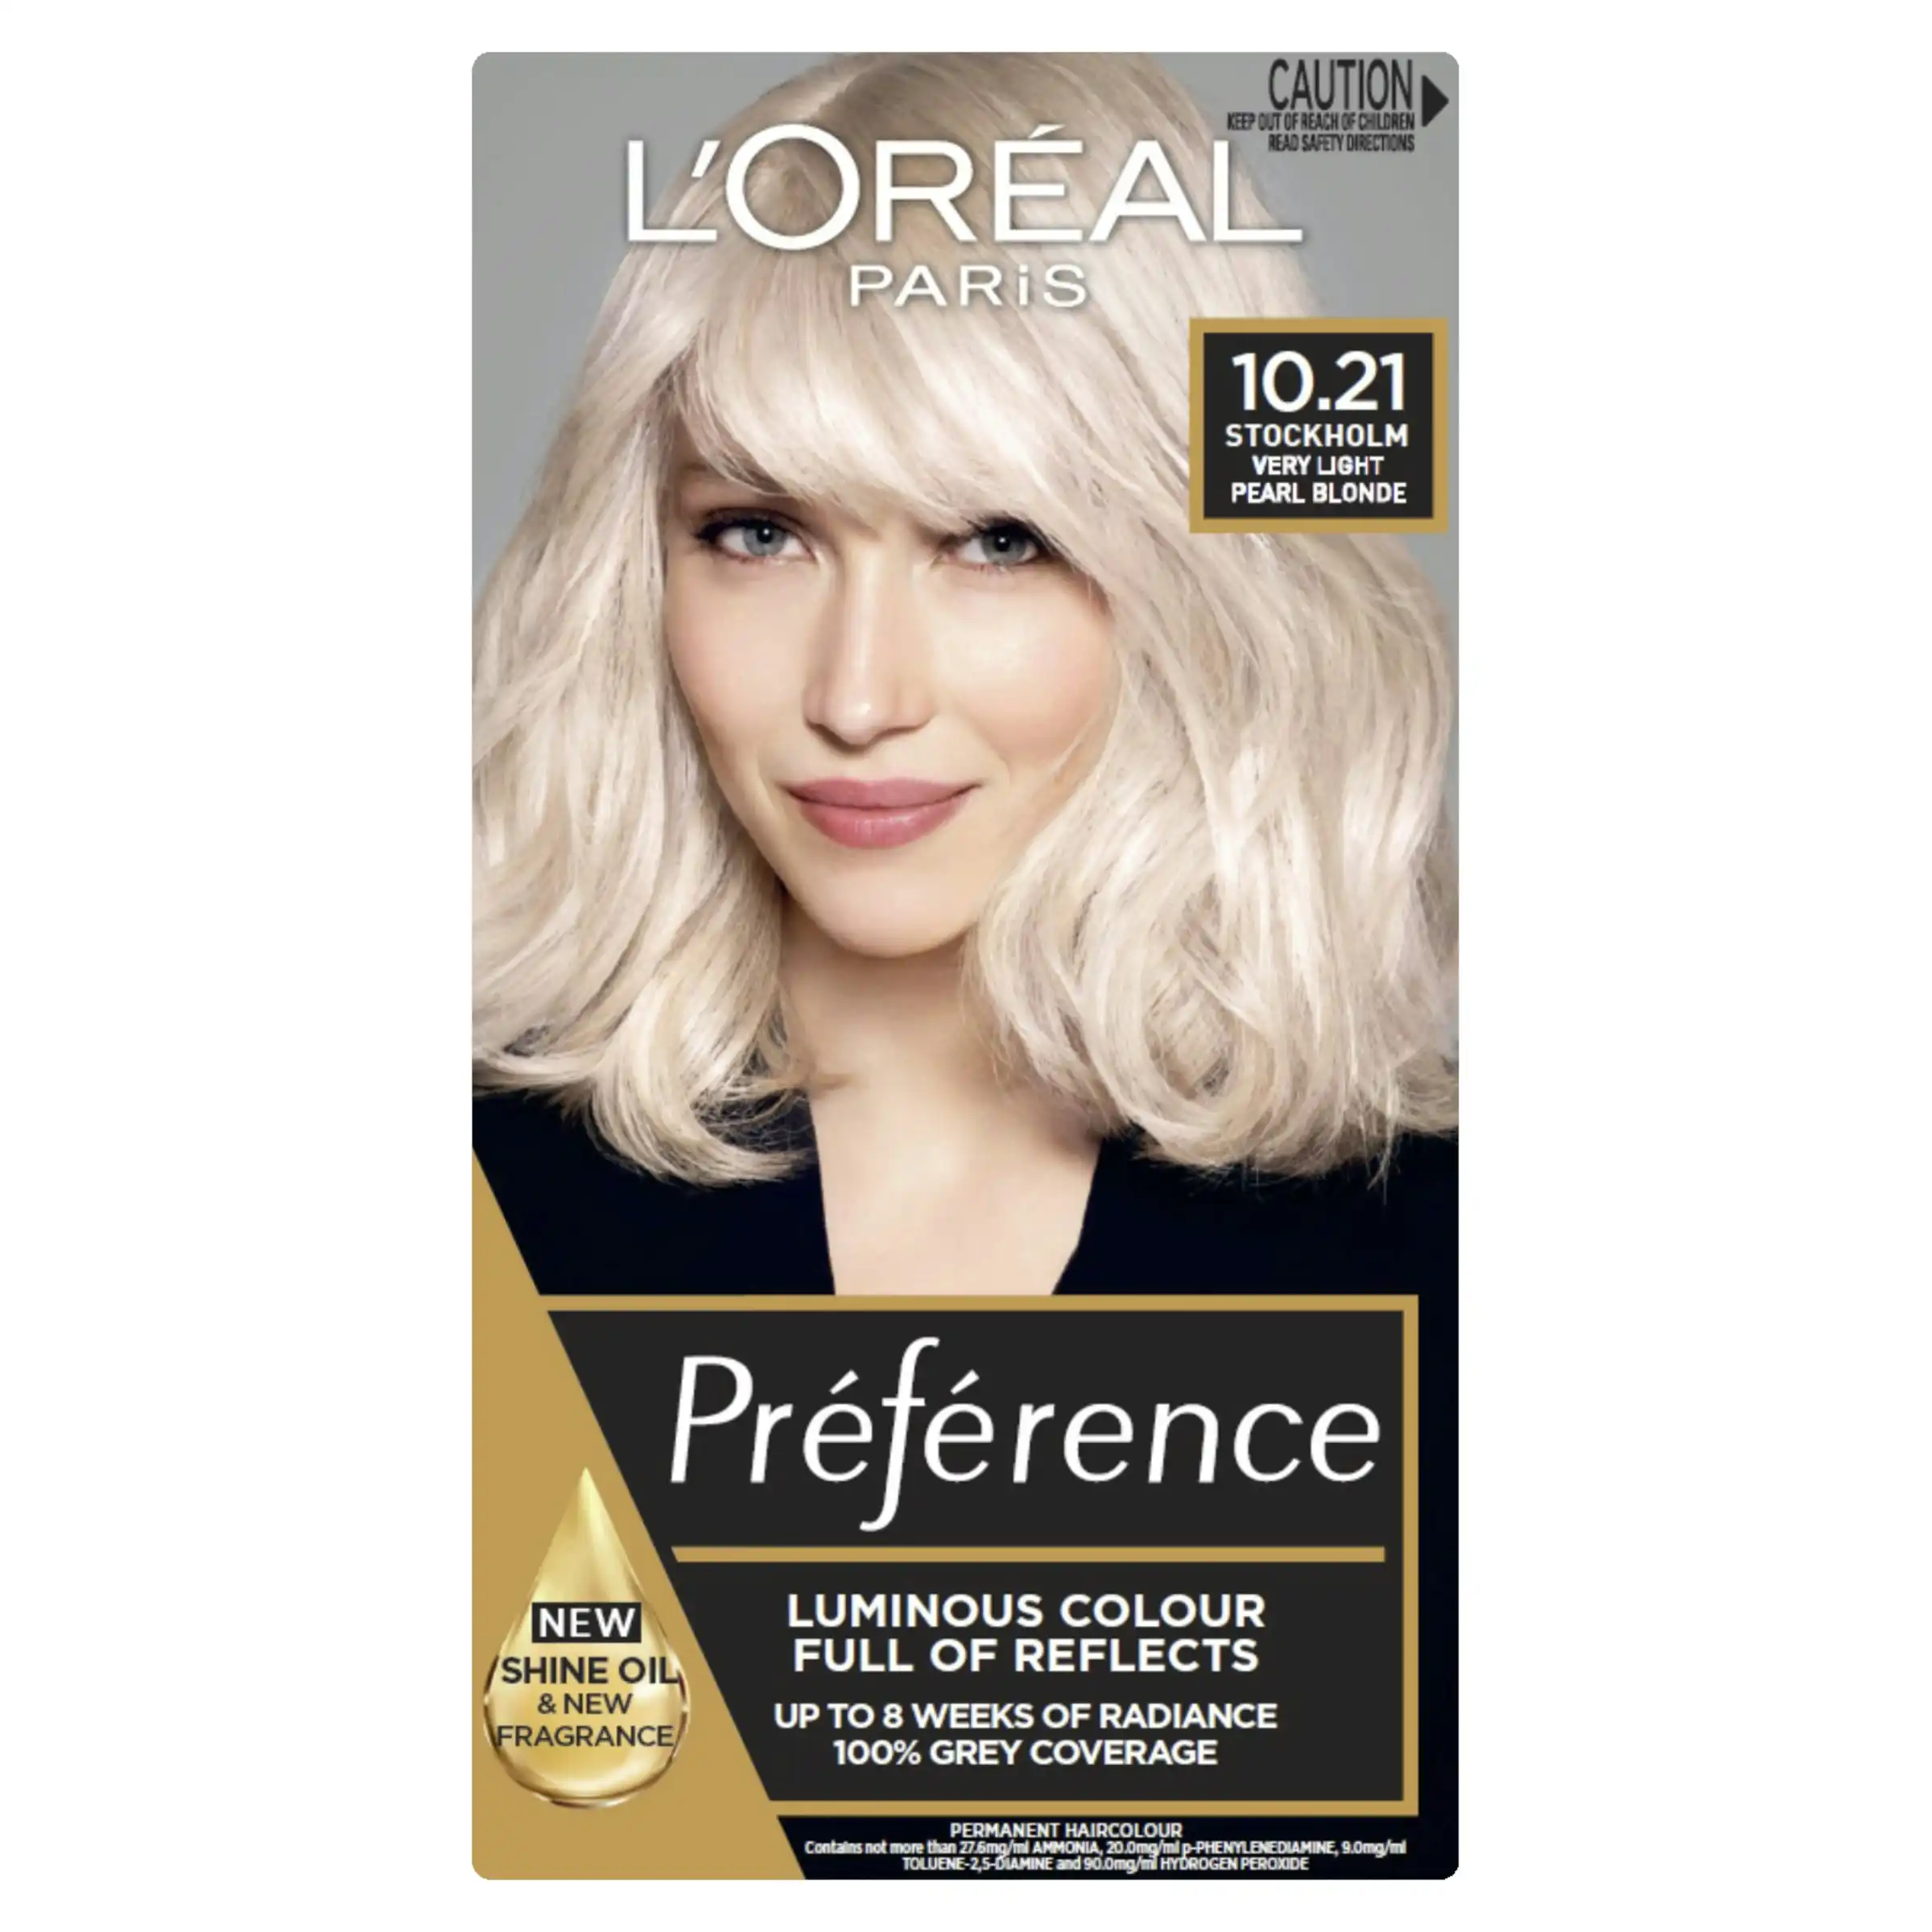 L'Oreal Paris Preference 10.21 Stockholm Very Light Pearl Blonde